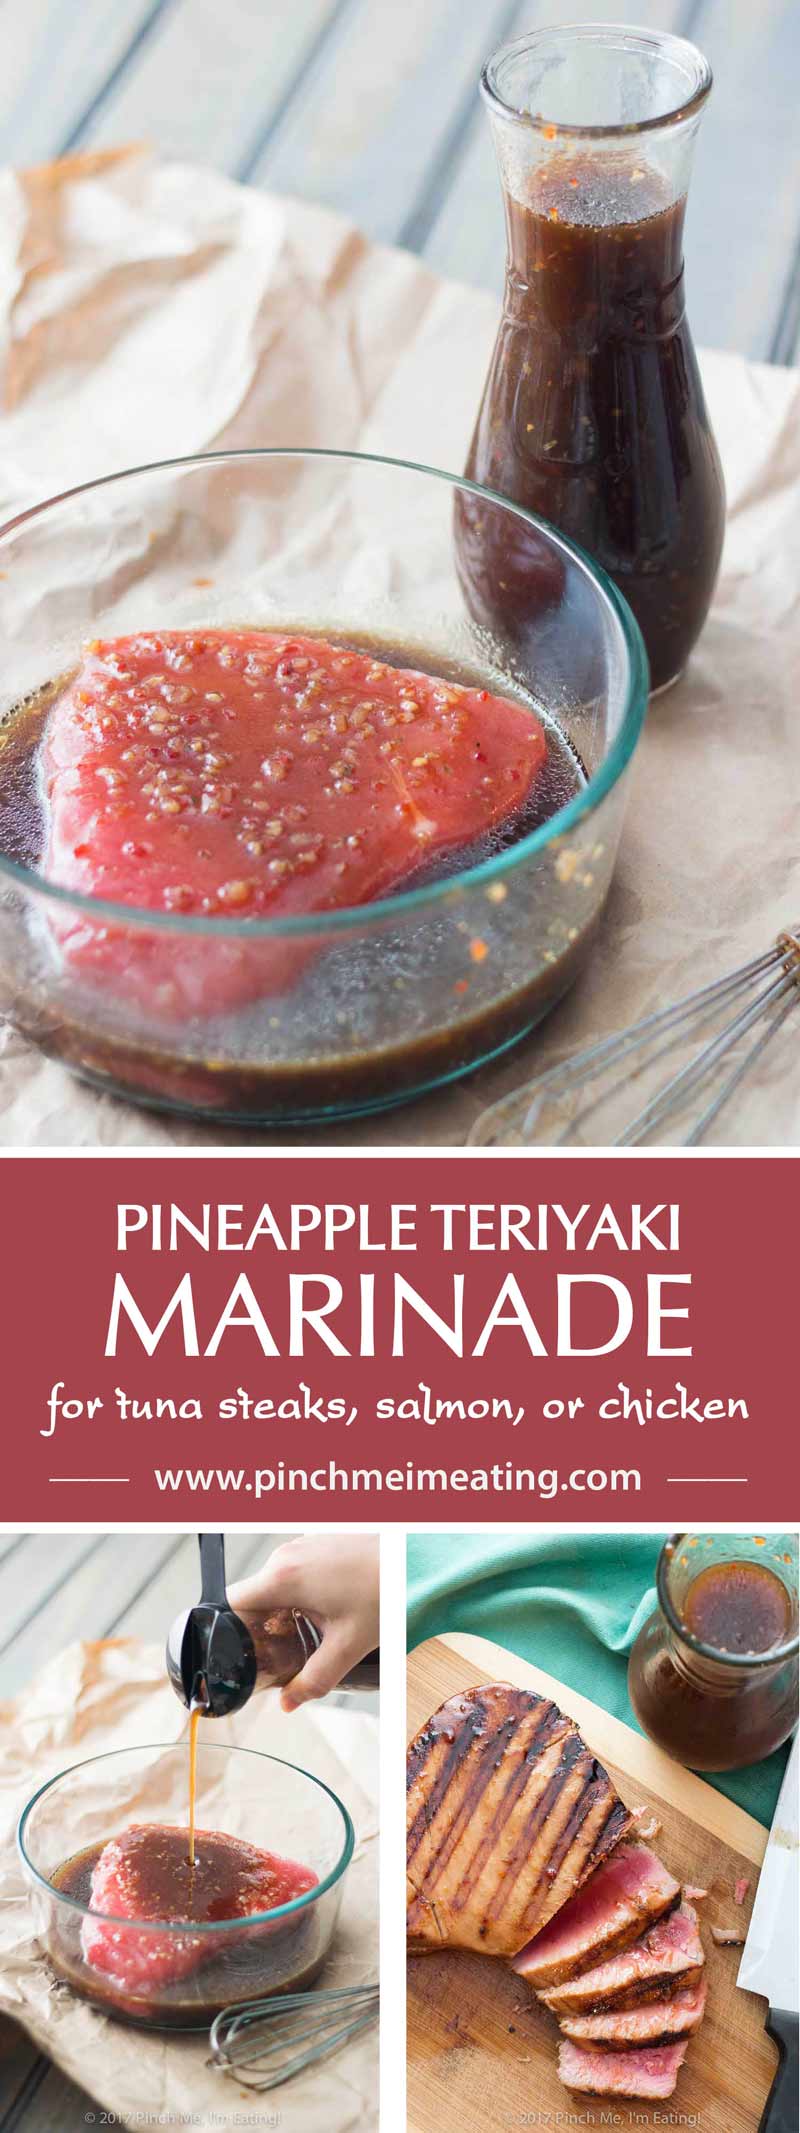 This pineapple teriyaki marinade is my absolute favorite way to prepare tuna steaks, but you can also use it on salmon or chicken, or even as a salad dressing!